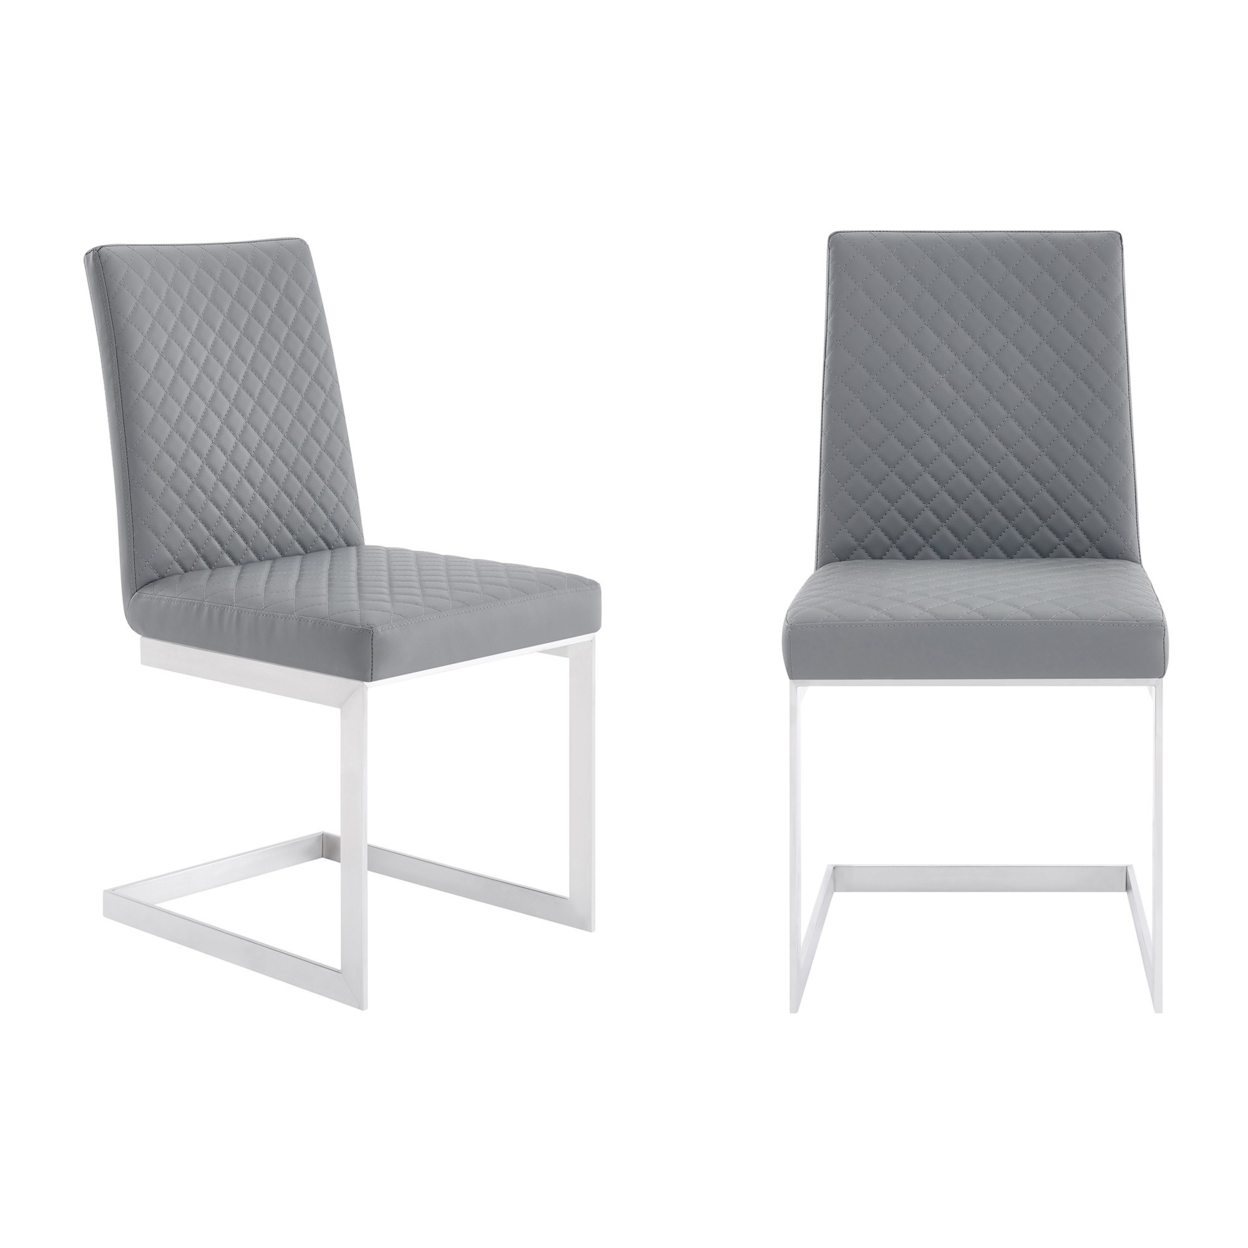 20 Inches Diamond Stitched Leatherette Dining Chair, Set Of 2, Gray- Saltoro Sherpi